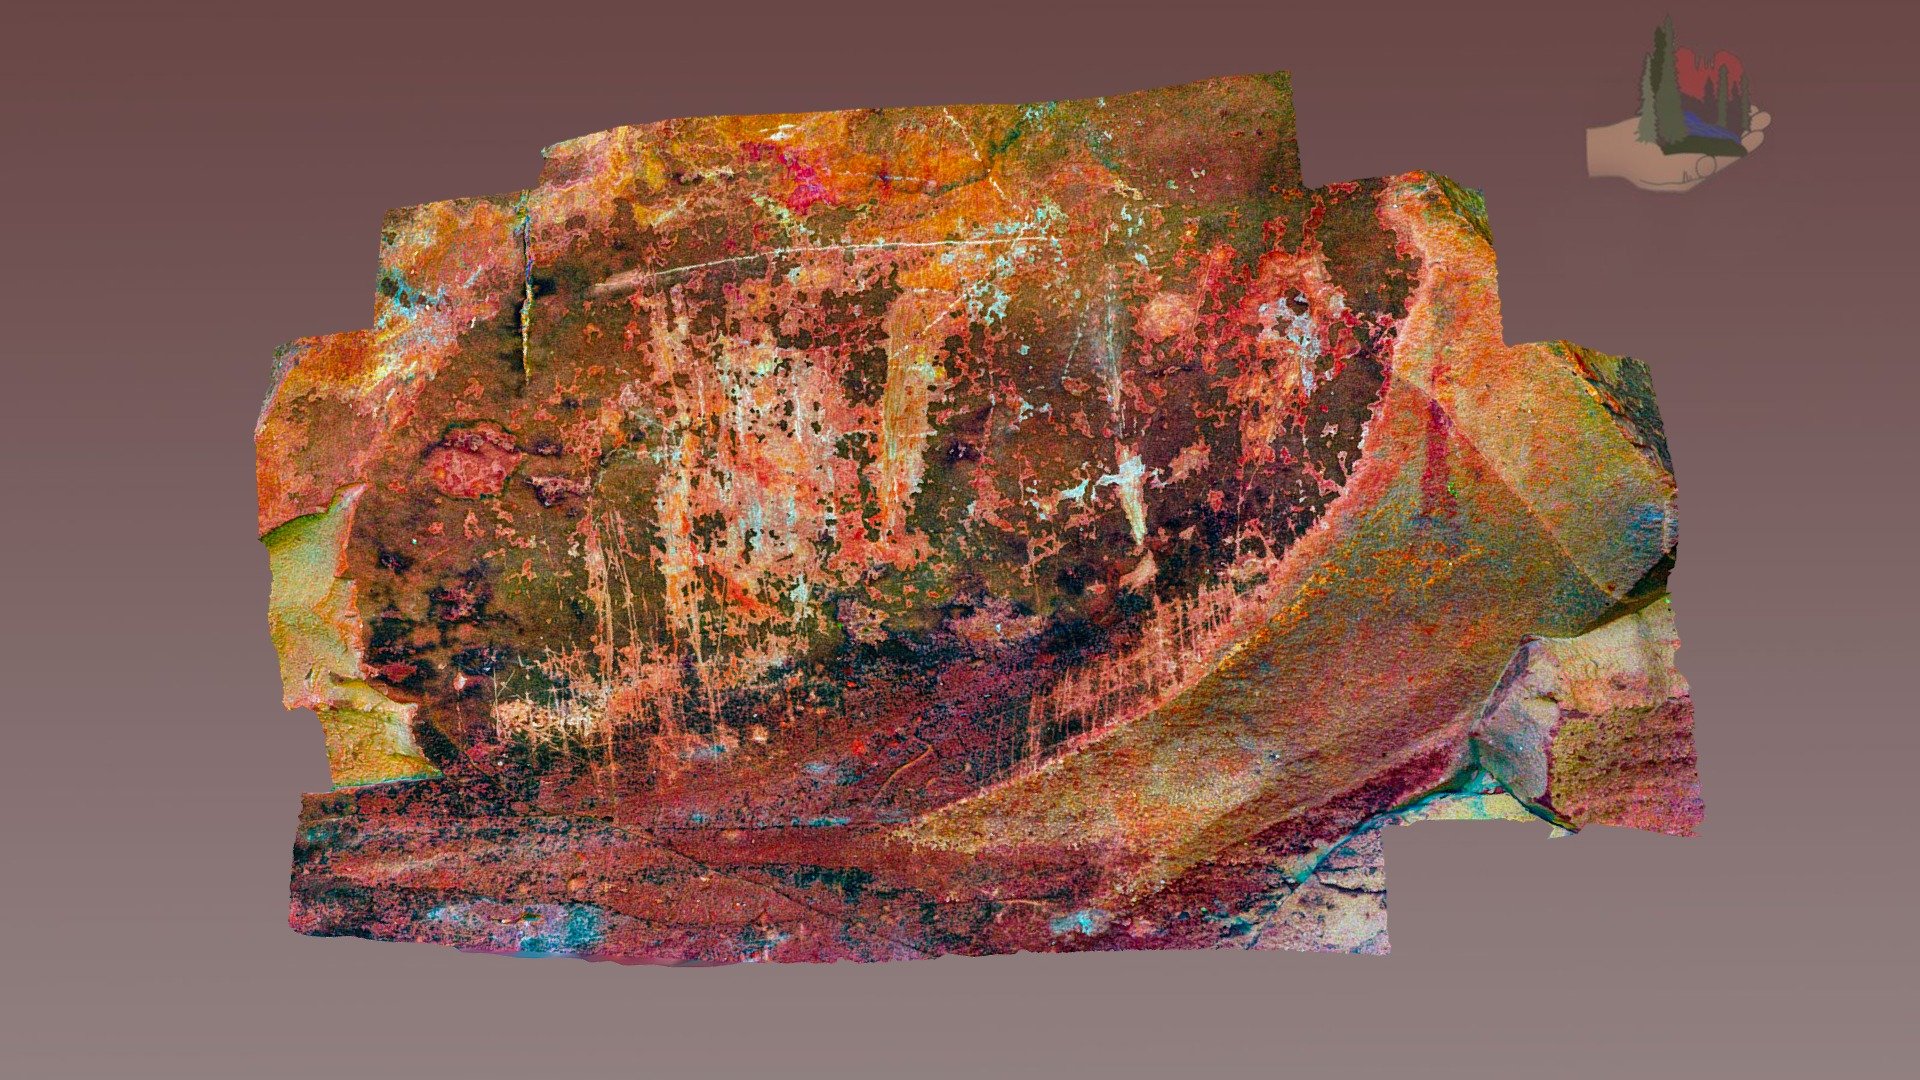 fs1859lab palatki grotto panel 1 dstretch lab - 3d model fofsedona a270191 small portion complex series possible archaic petroglyphs pictographs superpositioning over possibly older pre-archaic superimposed later sinagua apache imagery uses same input photographs used fs1859 but they have been processed algorithm enhance color variations determining types paint superposition part ongoing project evaluate younger petroglyph scratching additional information red rock district coconino forest can found following web sites http wwwsedonaredrocktrailsorg wwwfsusdagov recmain recreation volunteer opportunities including creation models other projects wwwfriendsoftheforestsedonaorg 3D print model - Mito3D